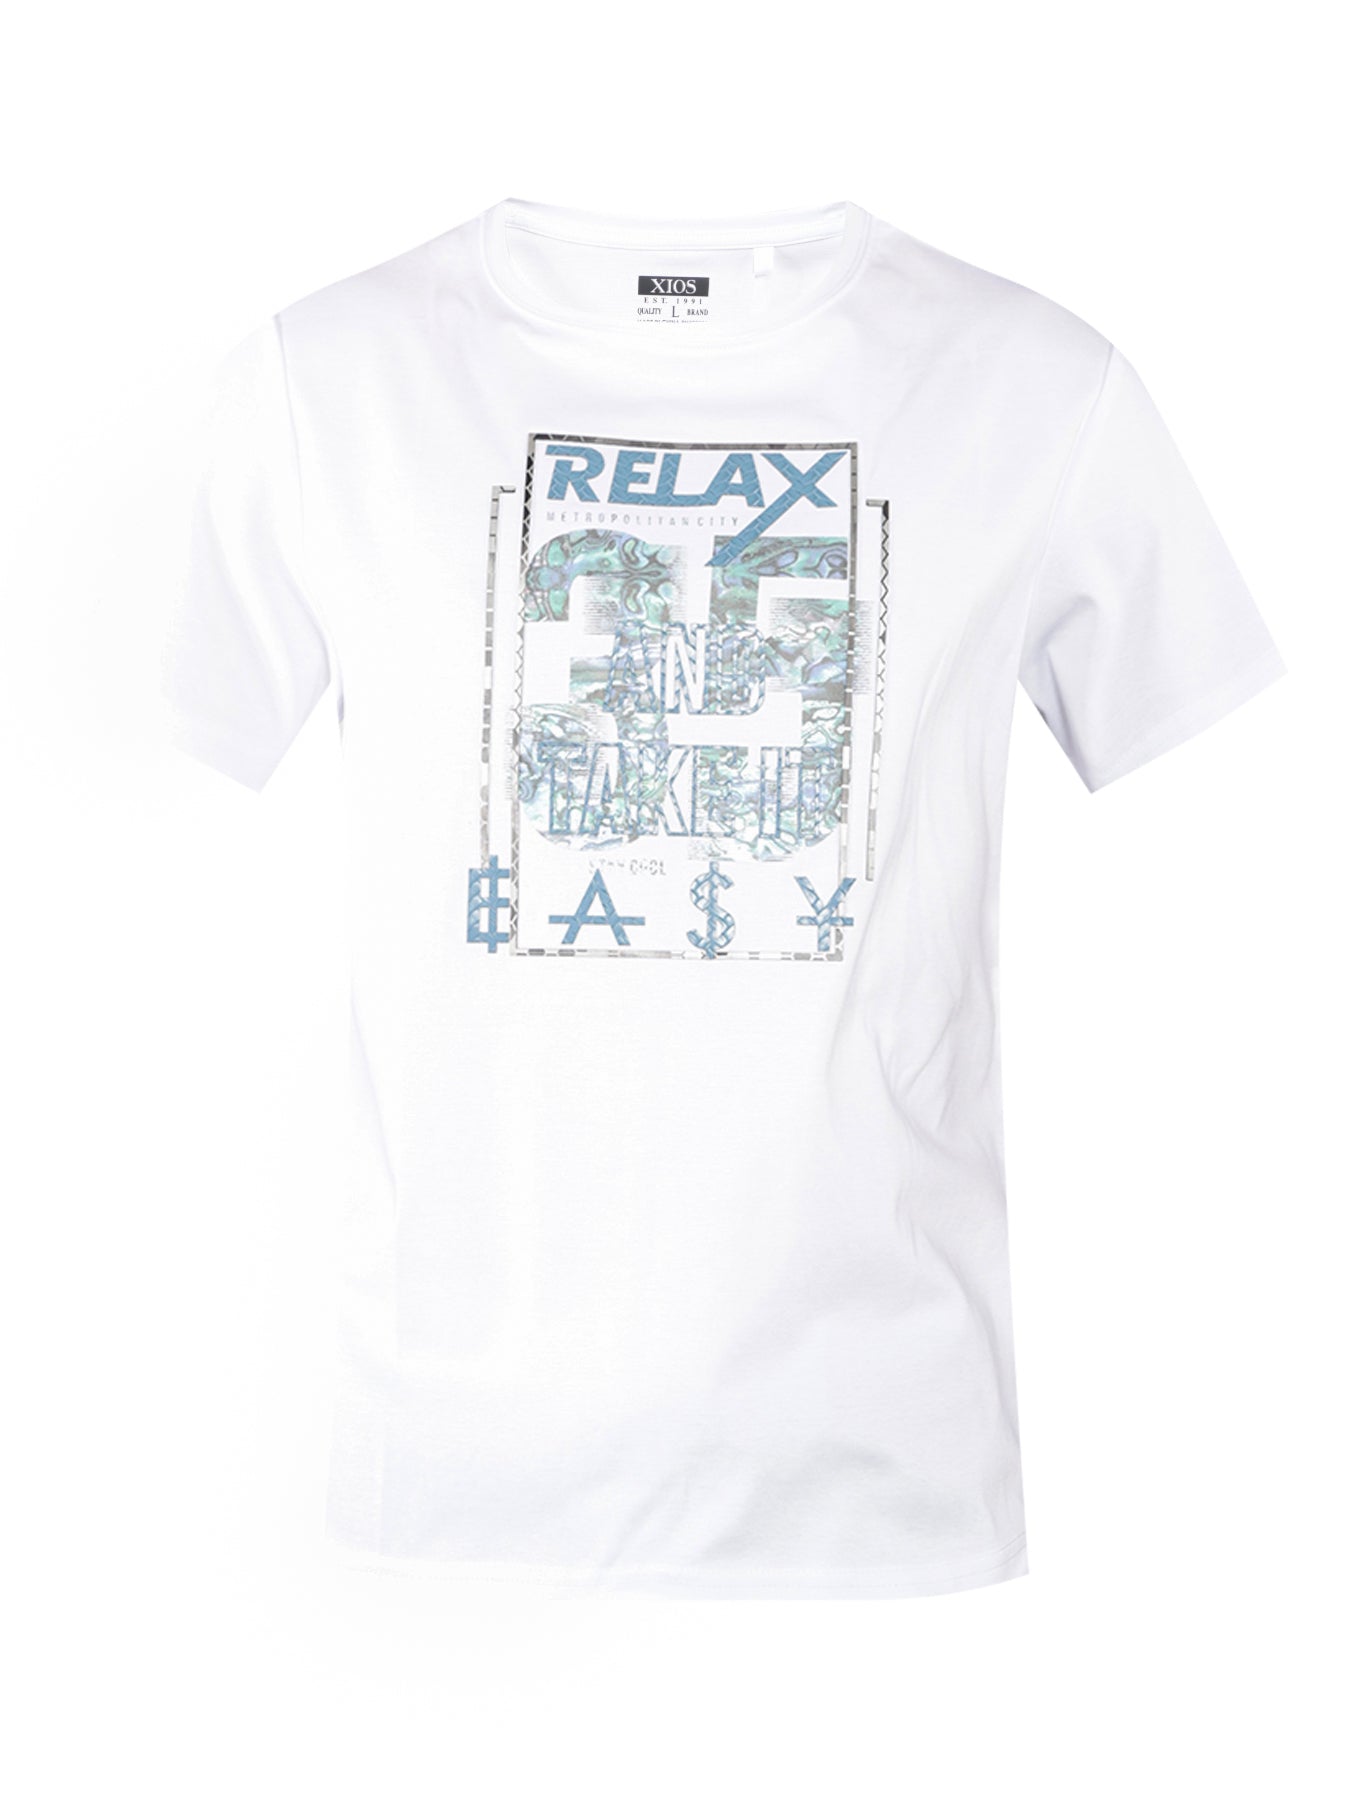 "Relax and Take It Easy" Graphic Tee